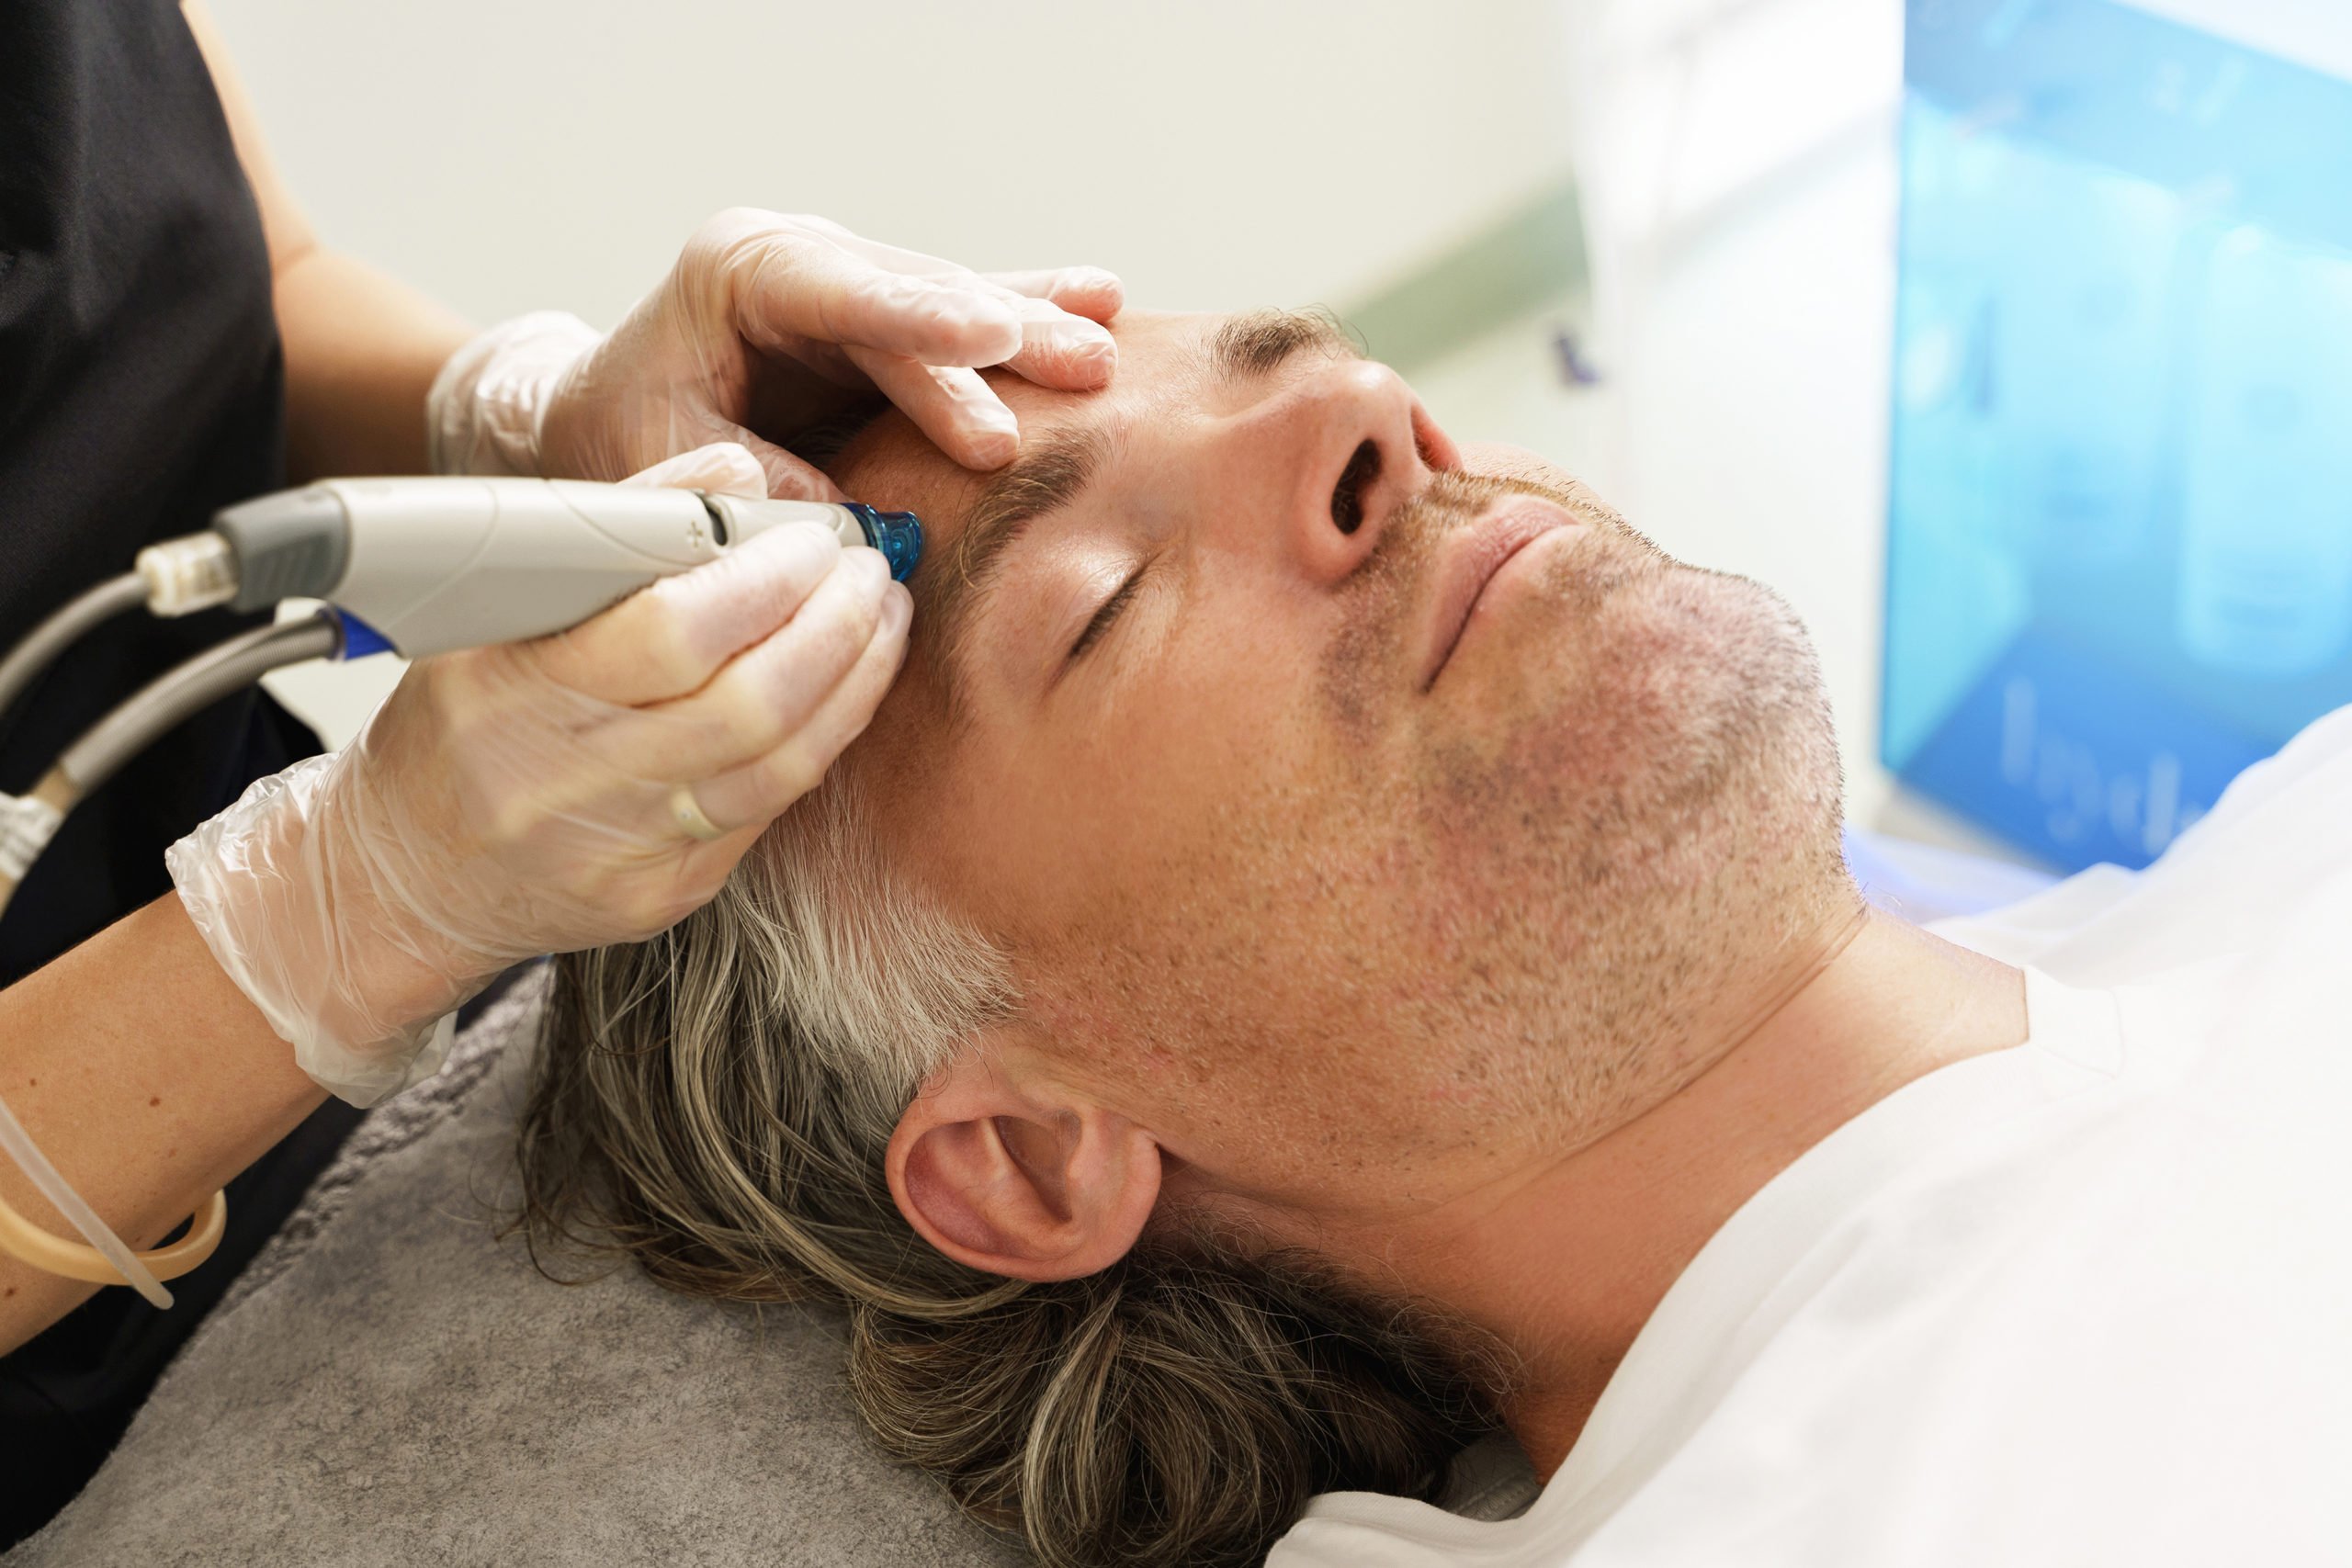 A Man getting facial treatment | Cultivated Beauty Aesthetic | Medspa in Guntersville, AL